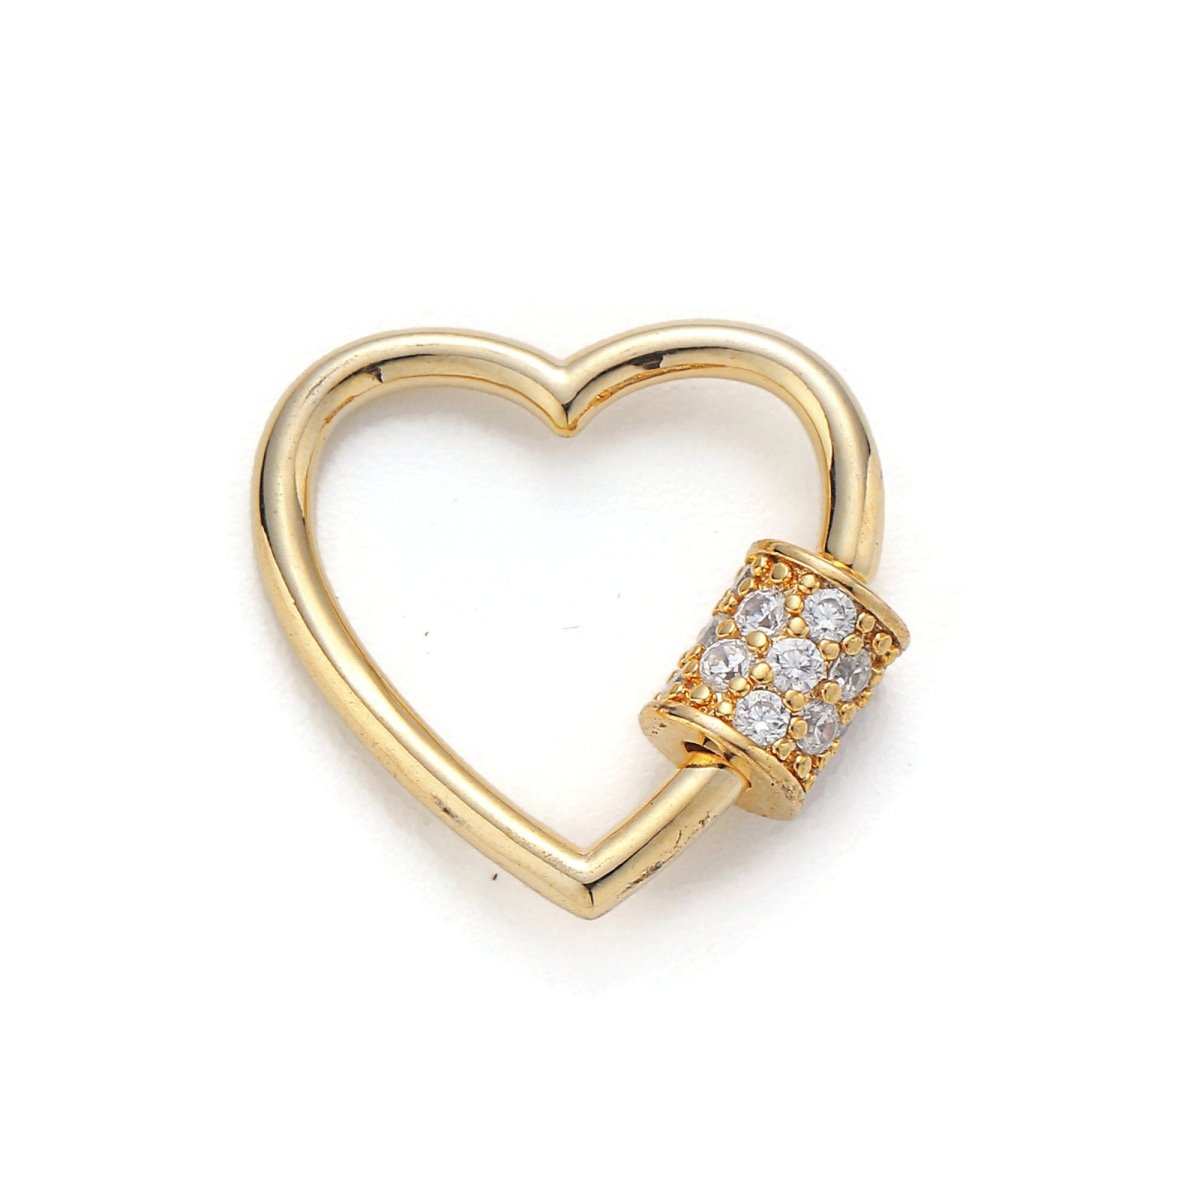 1pc Medium Heart Screw Clasp, Screw Clasp Heart, Interlocking Clasp, Pave Heart Shaped Clasps, Gold and Silver Color Option - DLUXCA